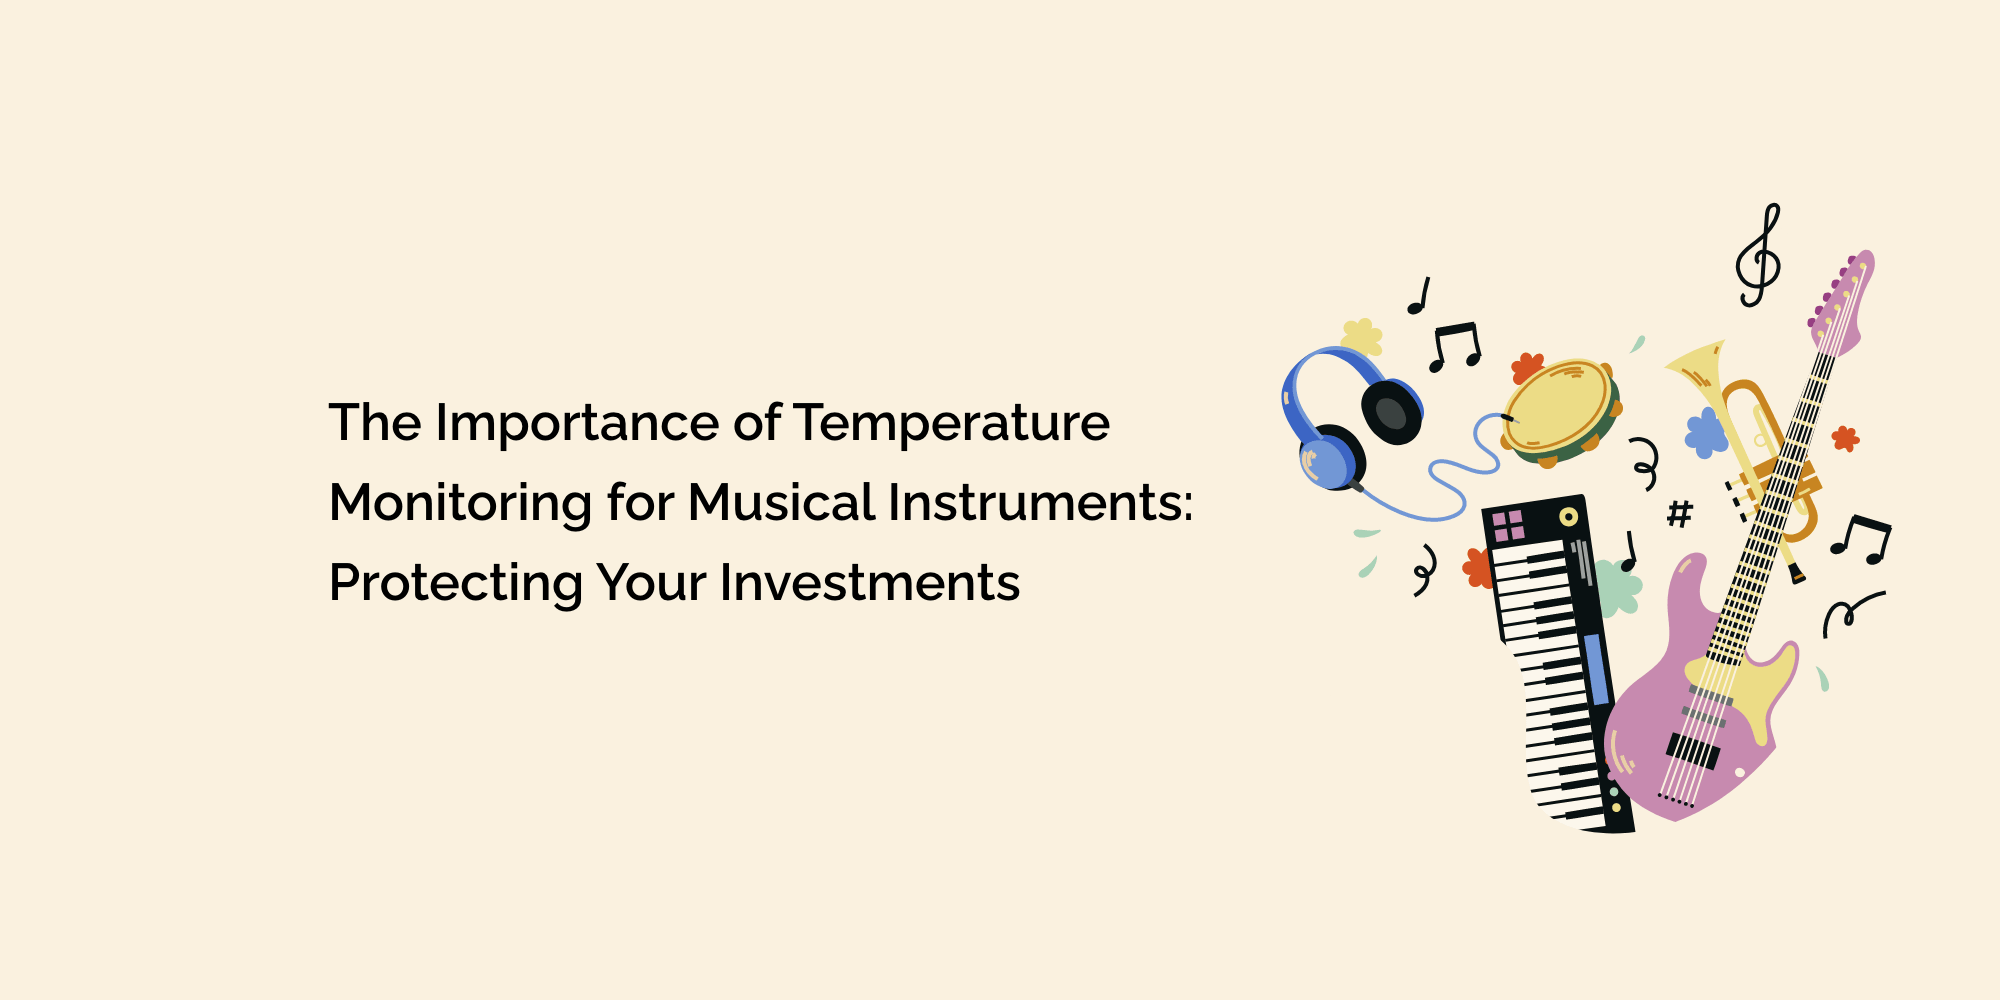 The Importance of Temperature Monitoring for Musical Instruments: Protecting Your Investments